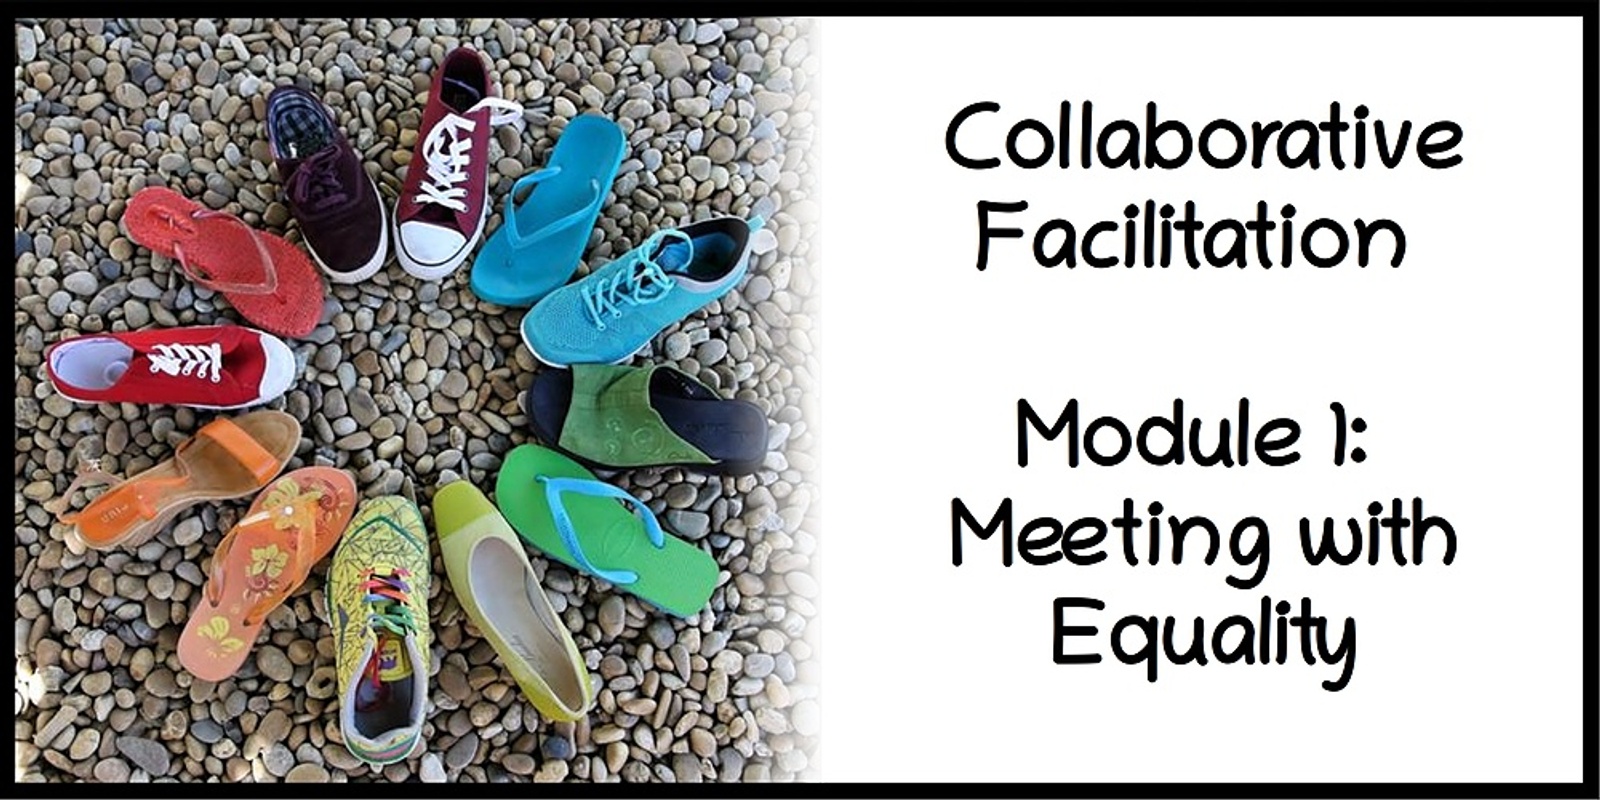 Collaborative Facilitation Module 1: Meeting with Equality - 2 March 2023